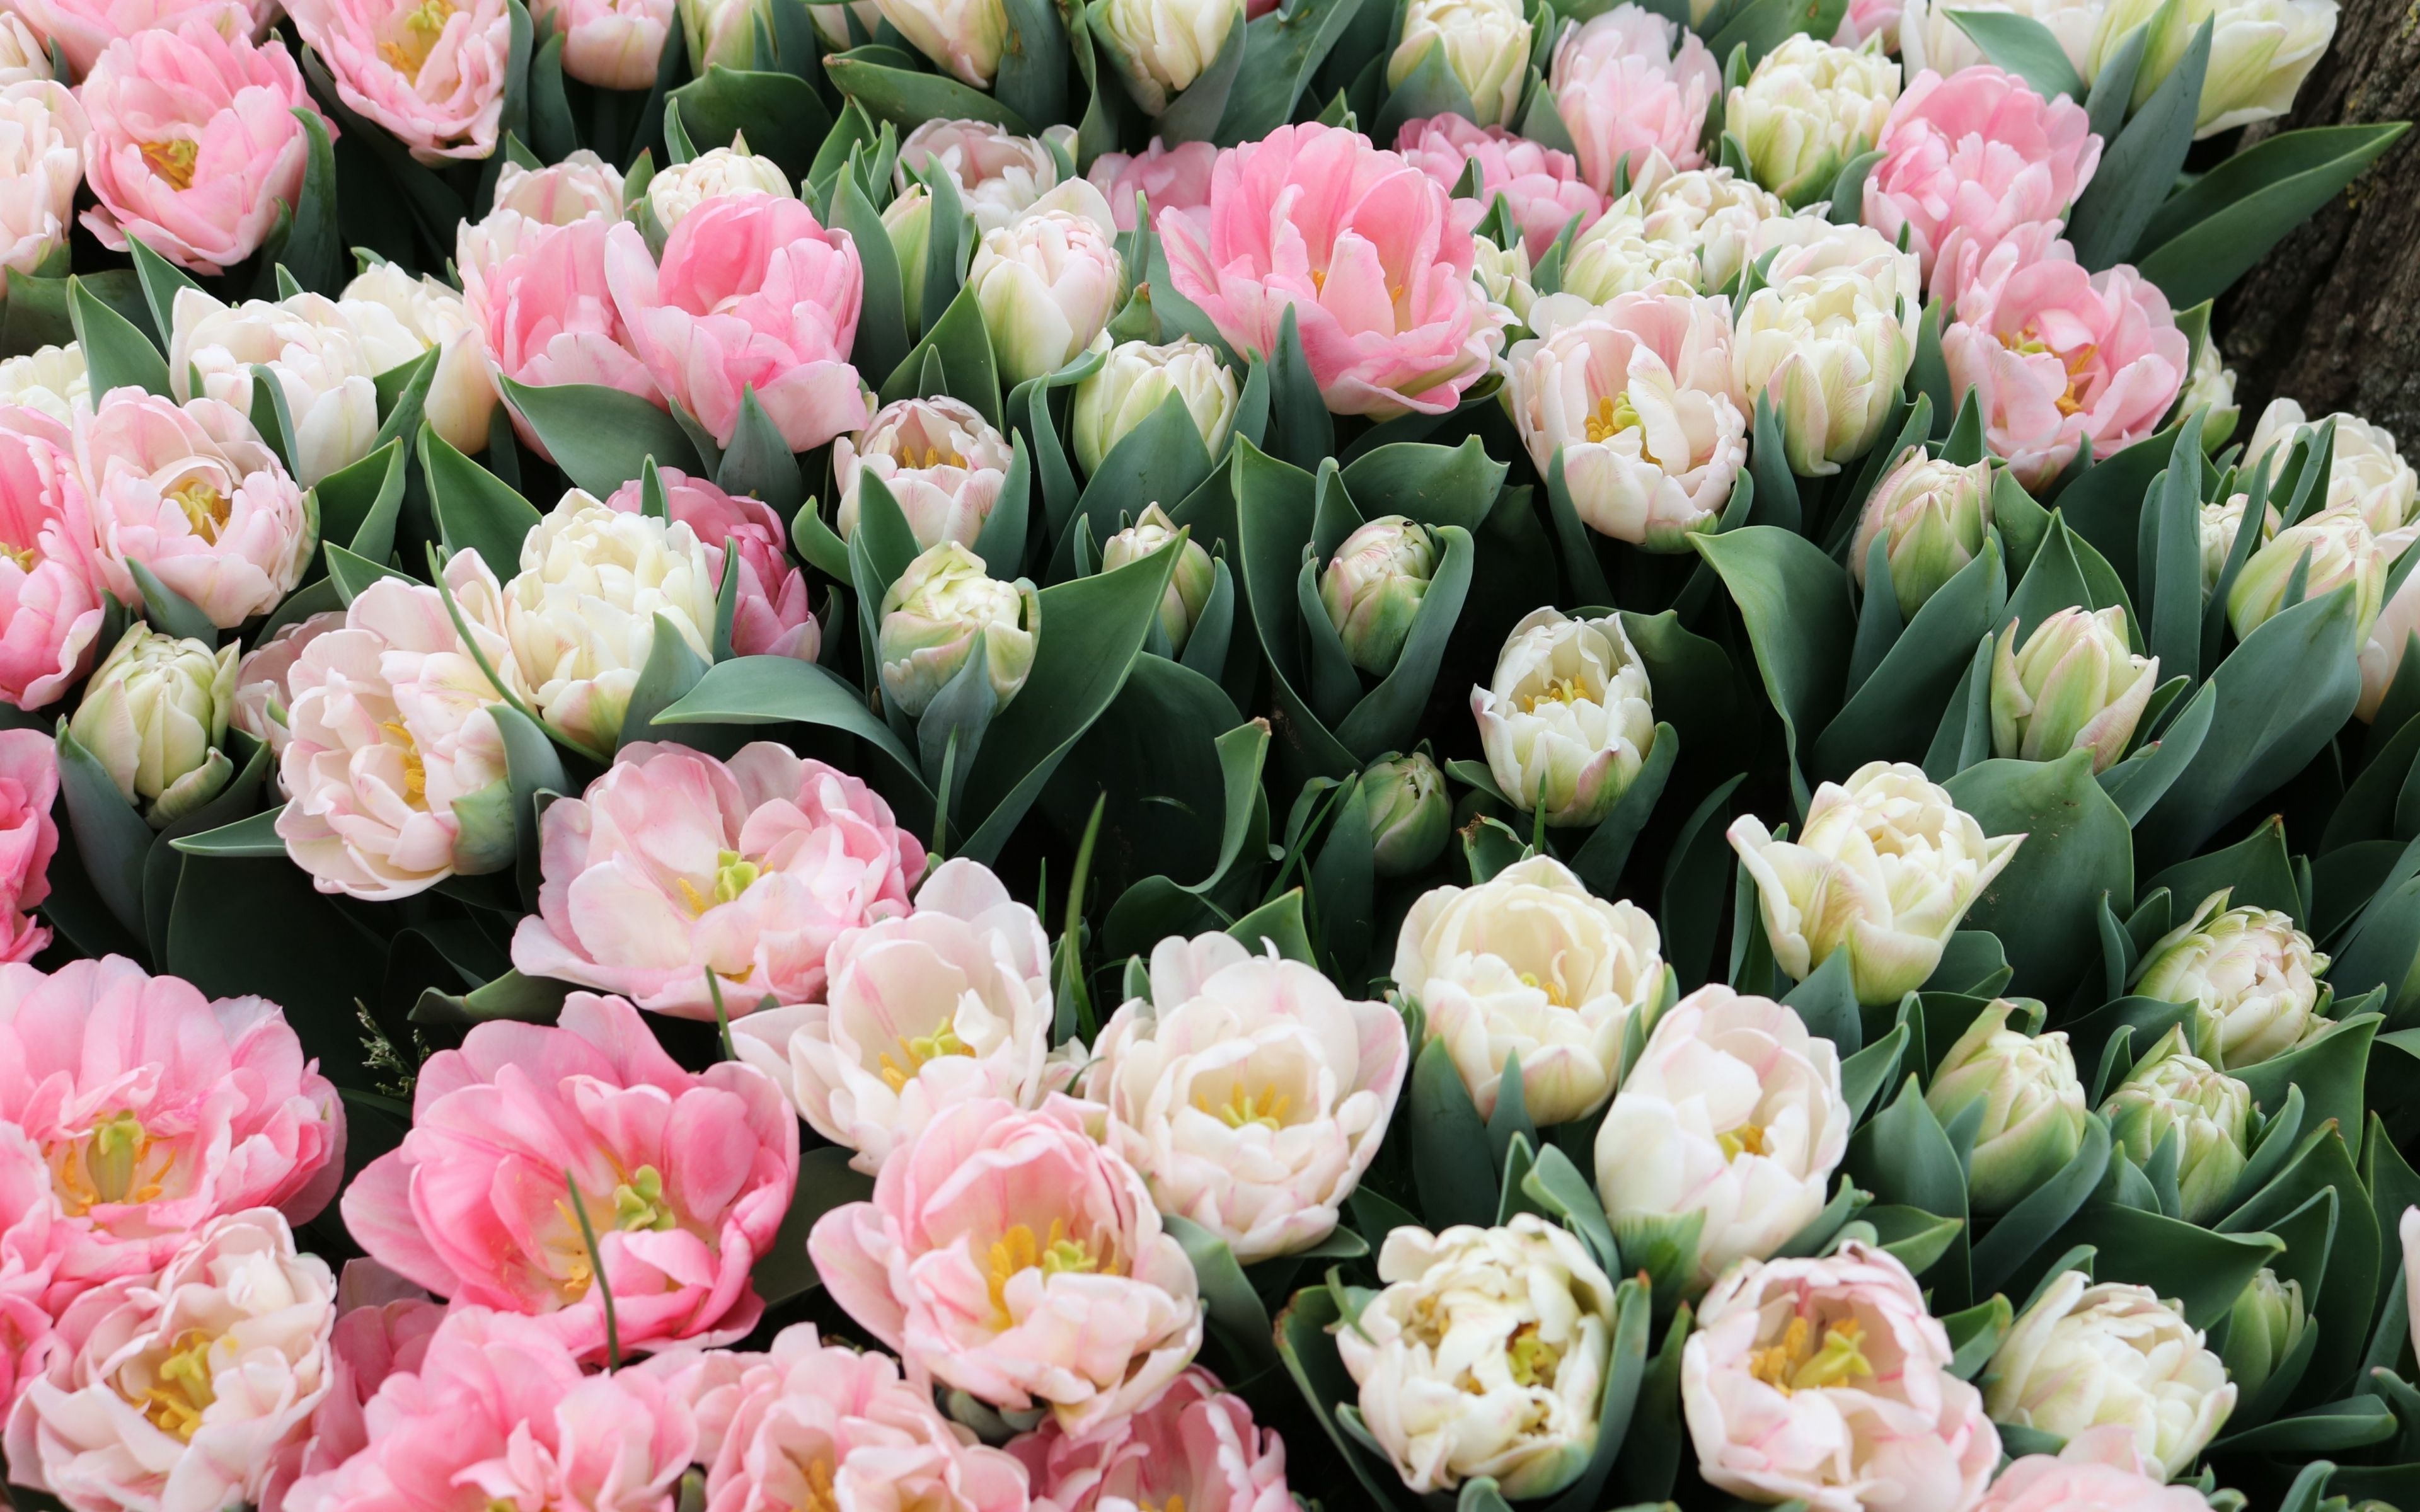 Download 3840x2400 wallpaper tulips, fresh, white & pink flowers, 4k, ultra HD 16: widescreen, 3840x2400 HD image, background, 4696